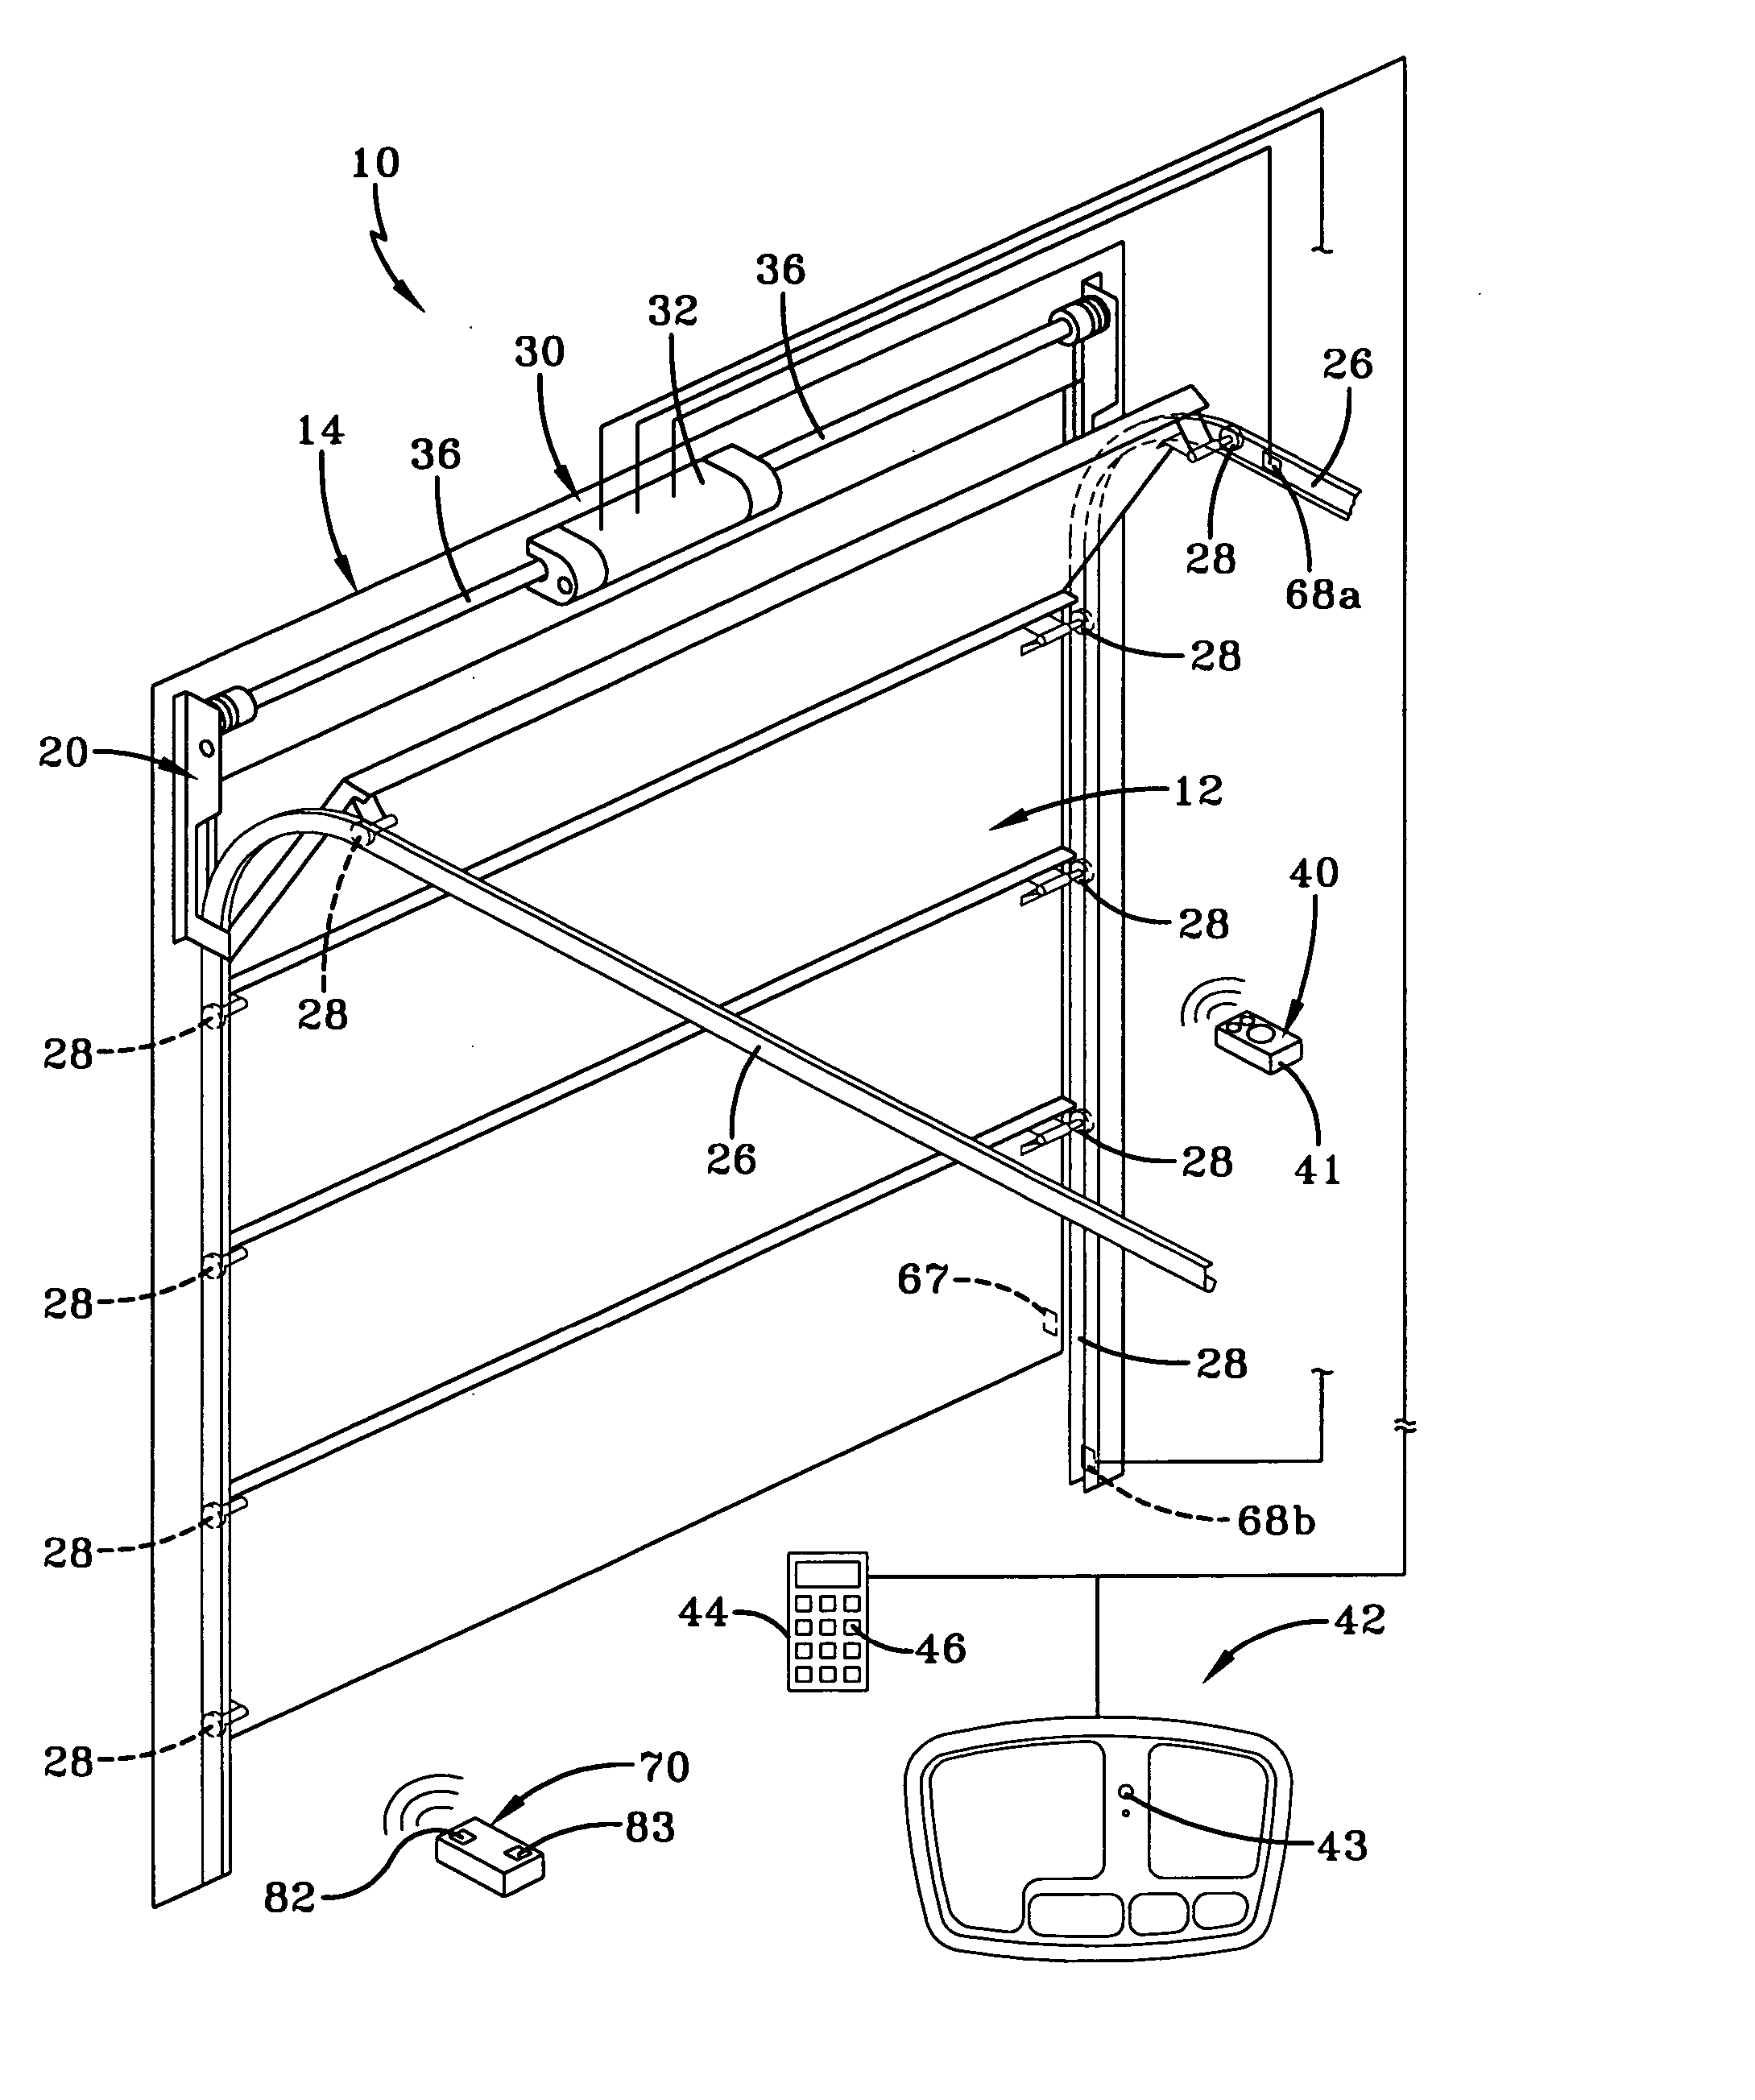 System and methods for automatically moving access barriers initiated by mobile transmitter devices